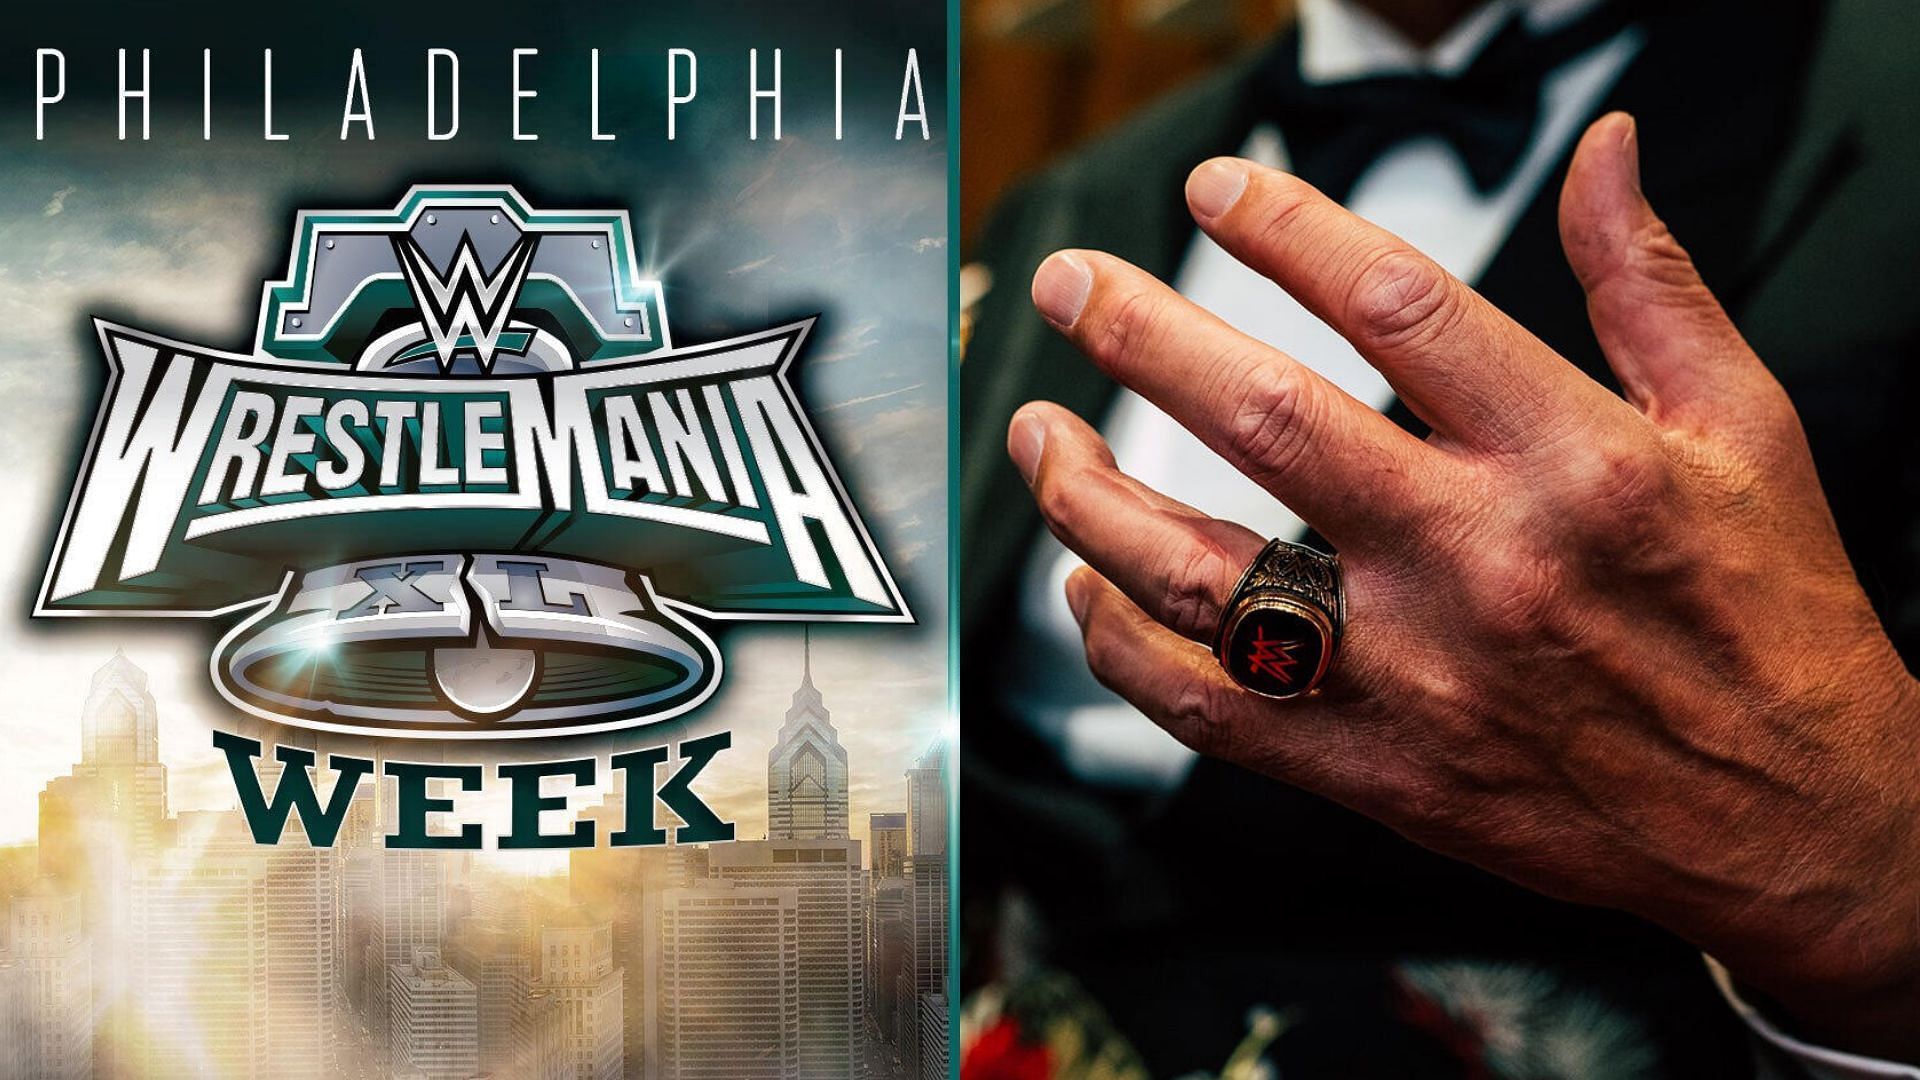 The City of Brotherly Love is hosting WWE WrestleMania XL (Photo Courtesy: WWE)